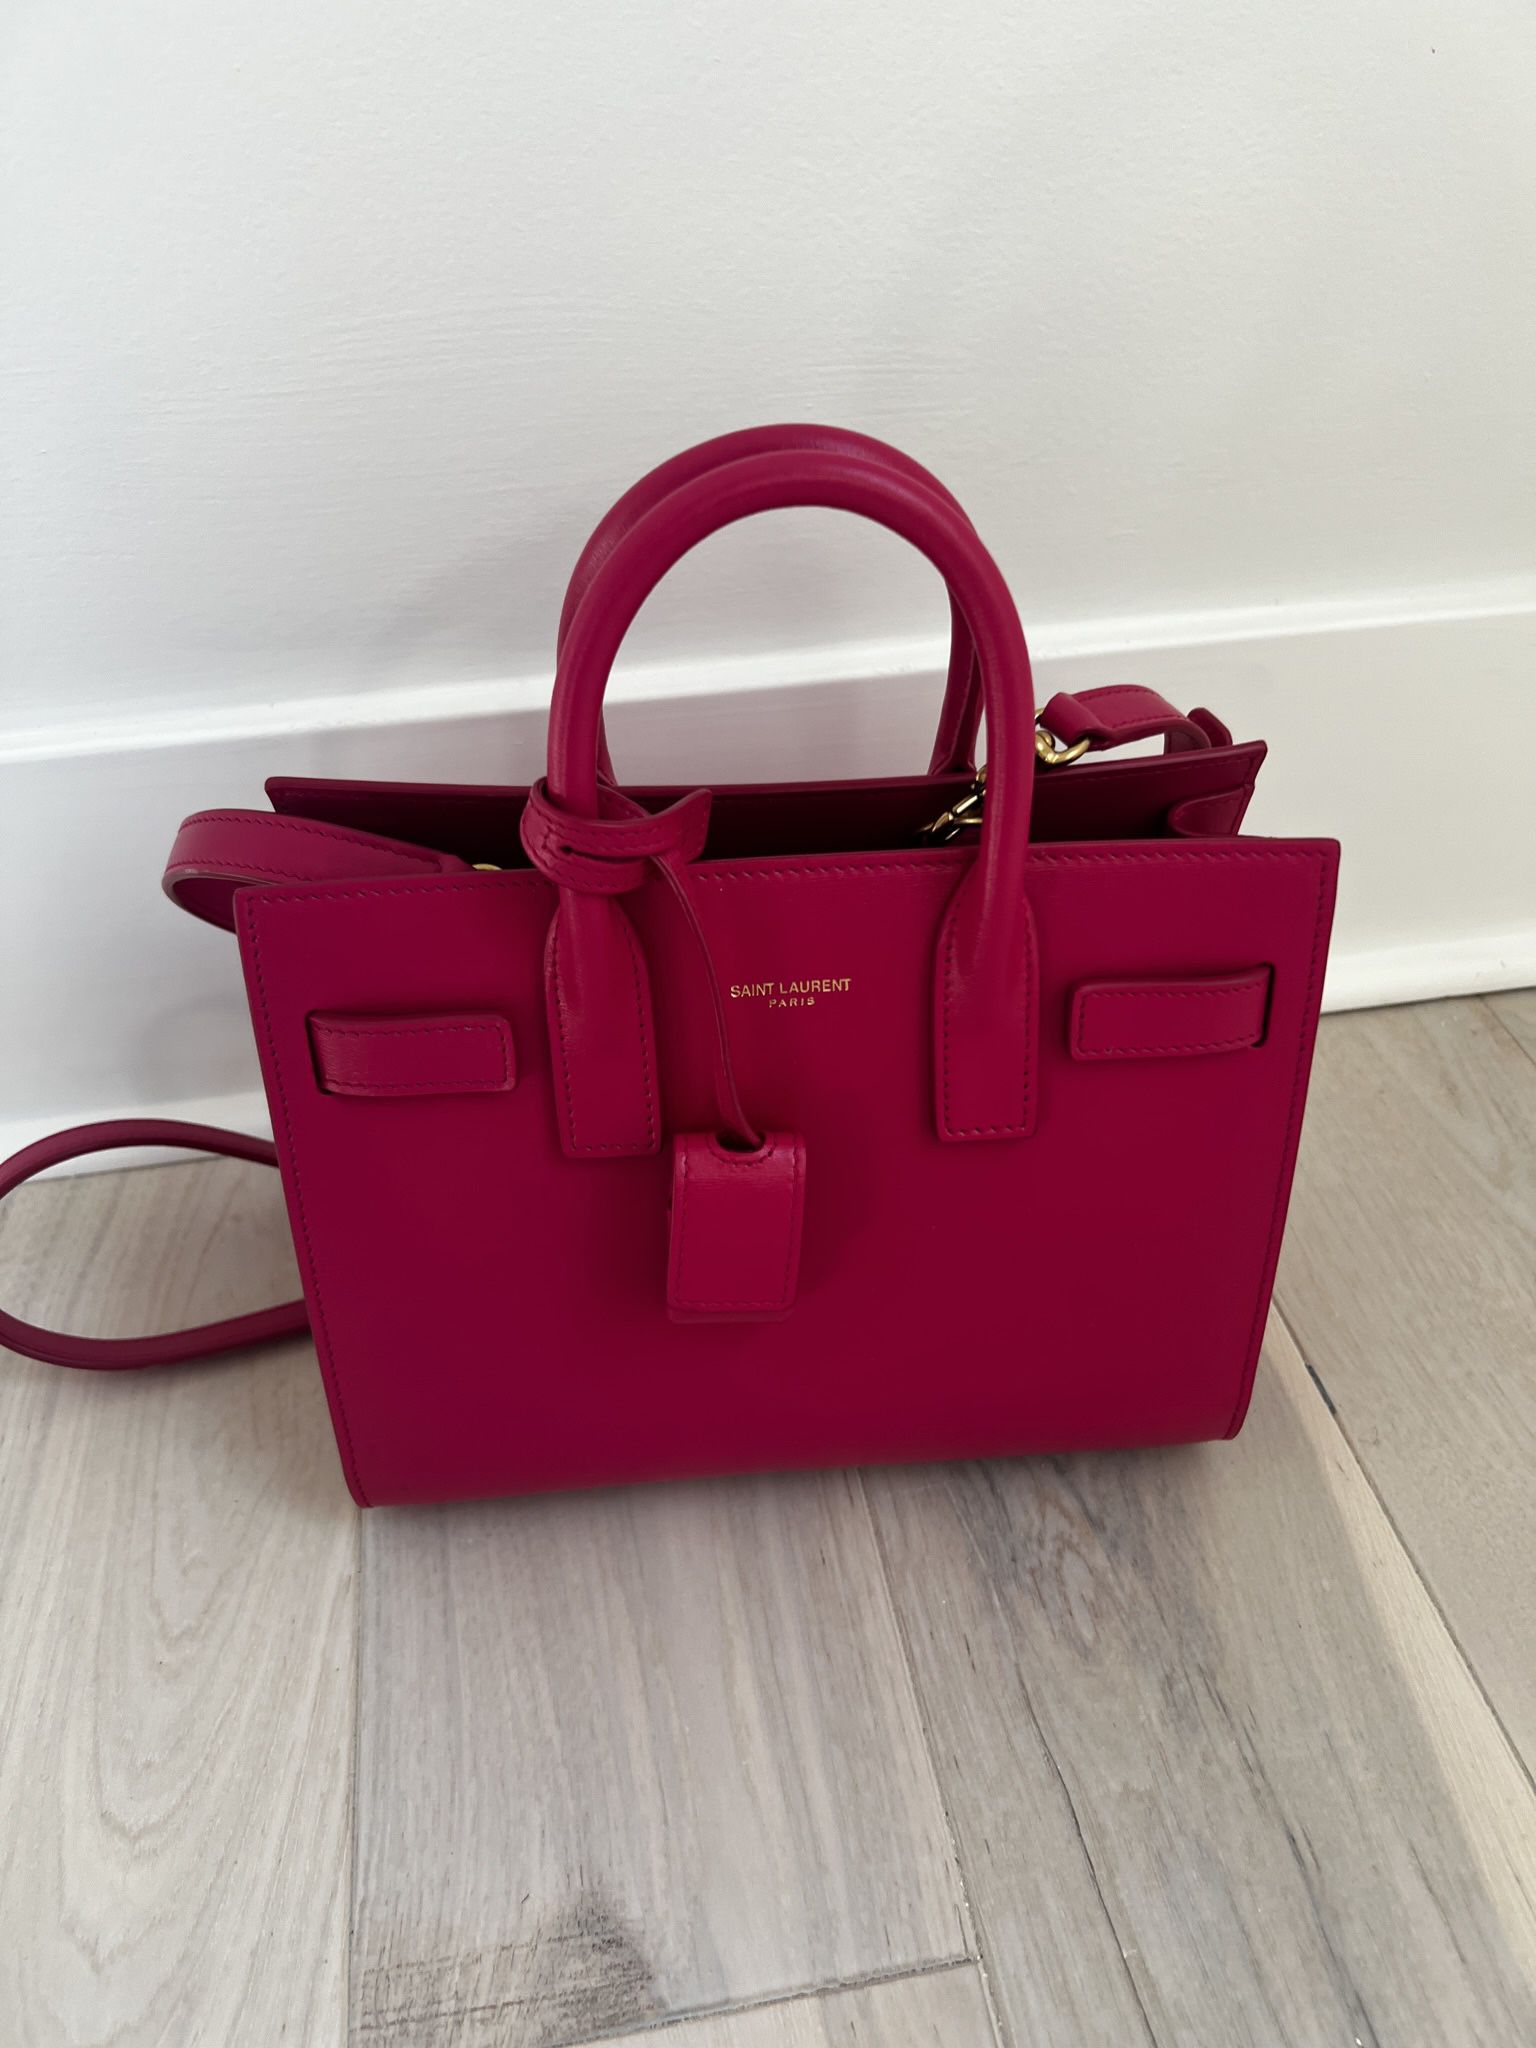 YSL Loulou bag for Sale in Downey, CA - OfferUp